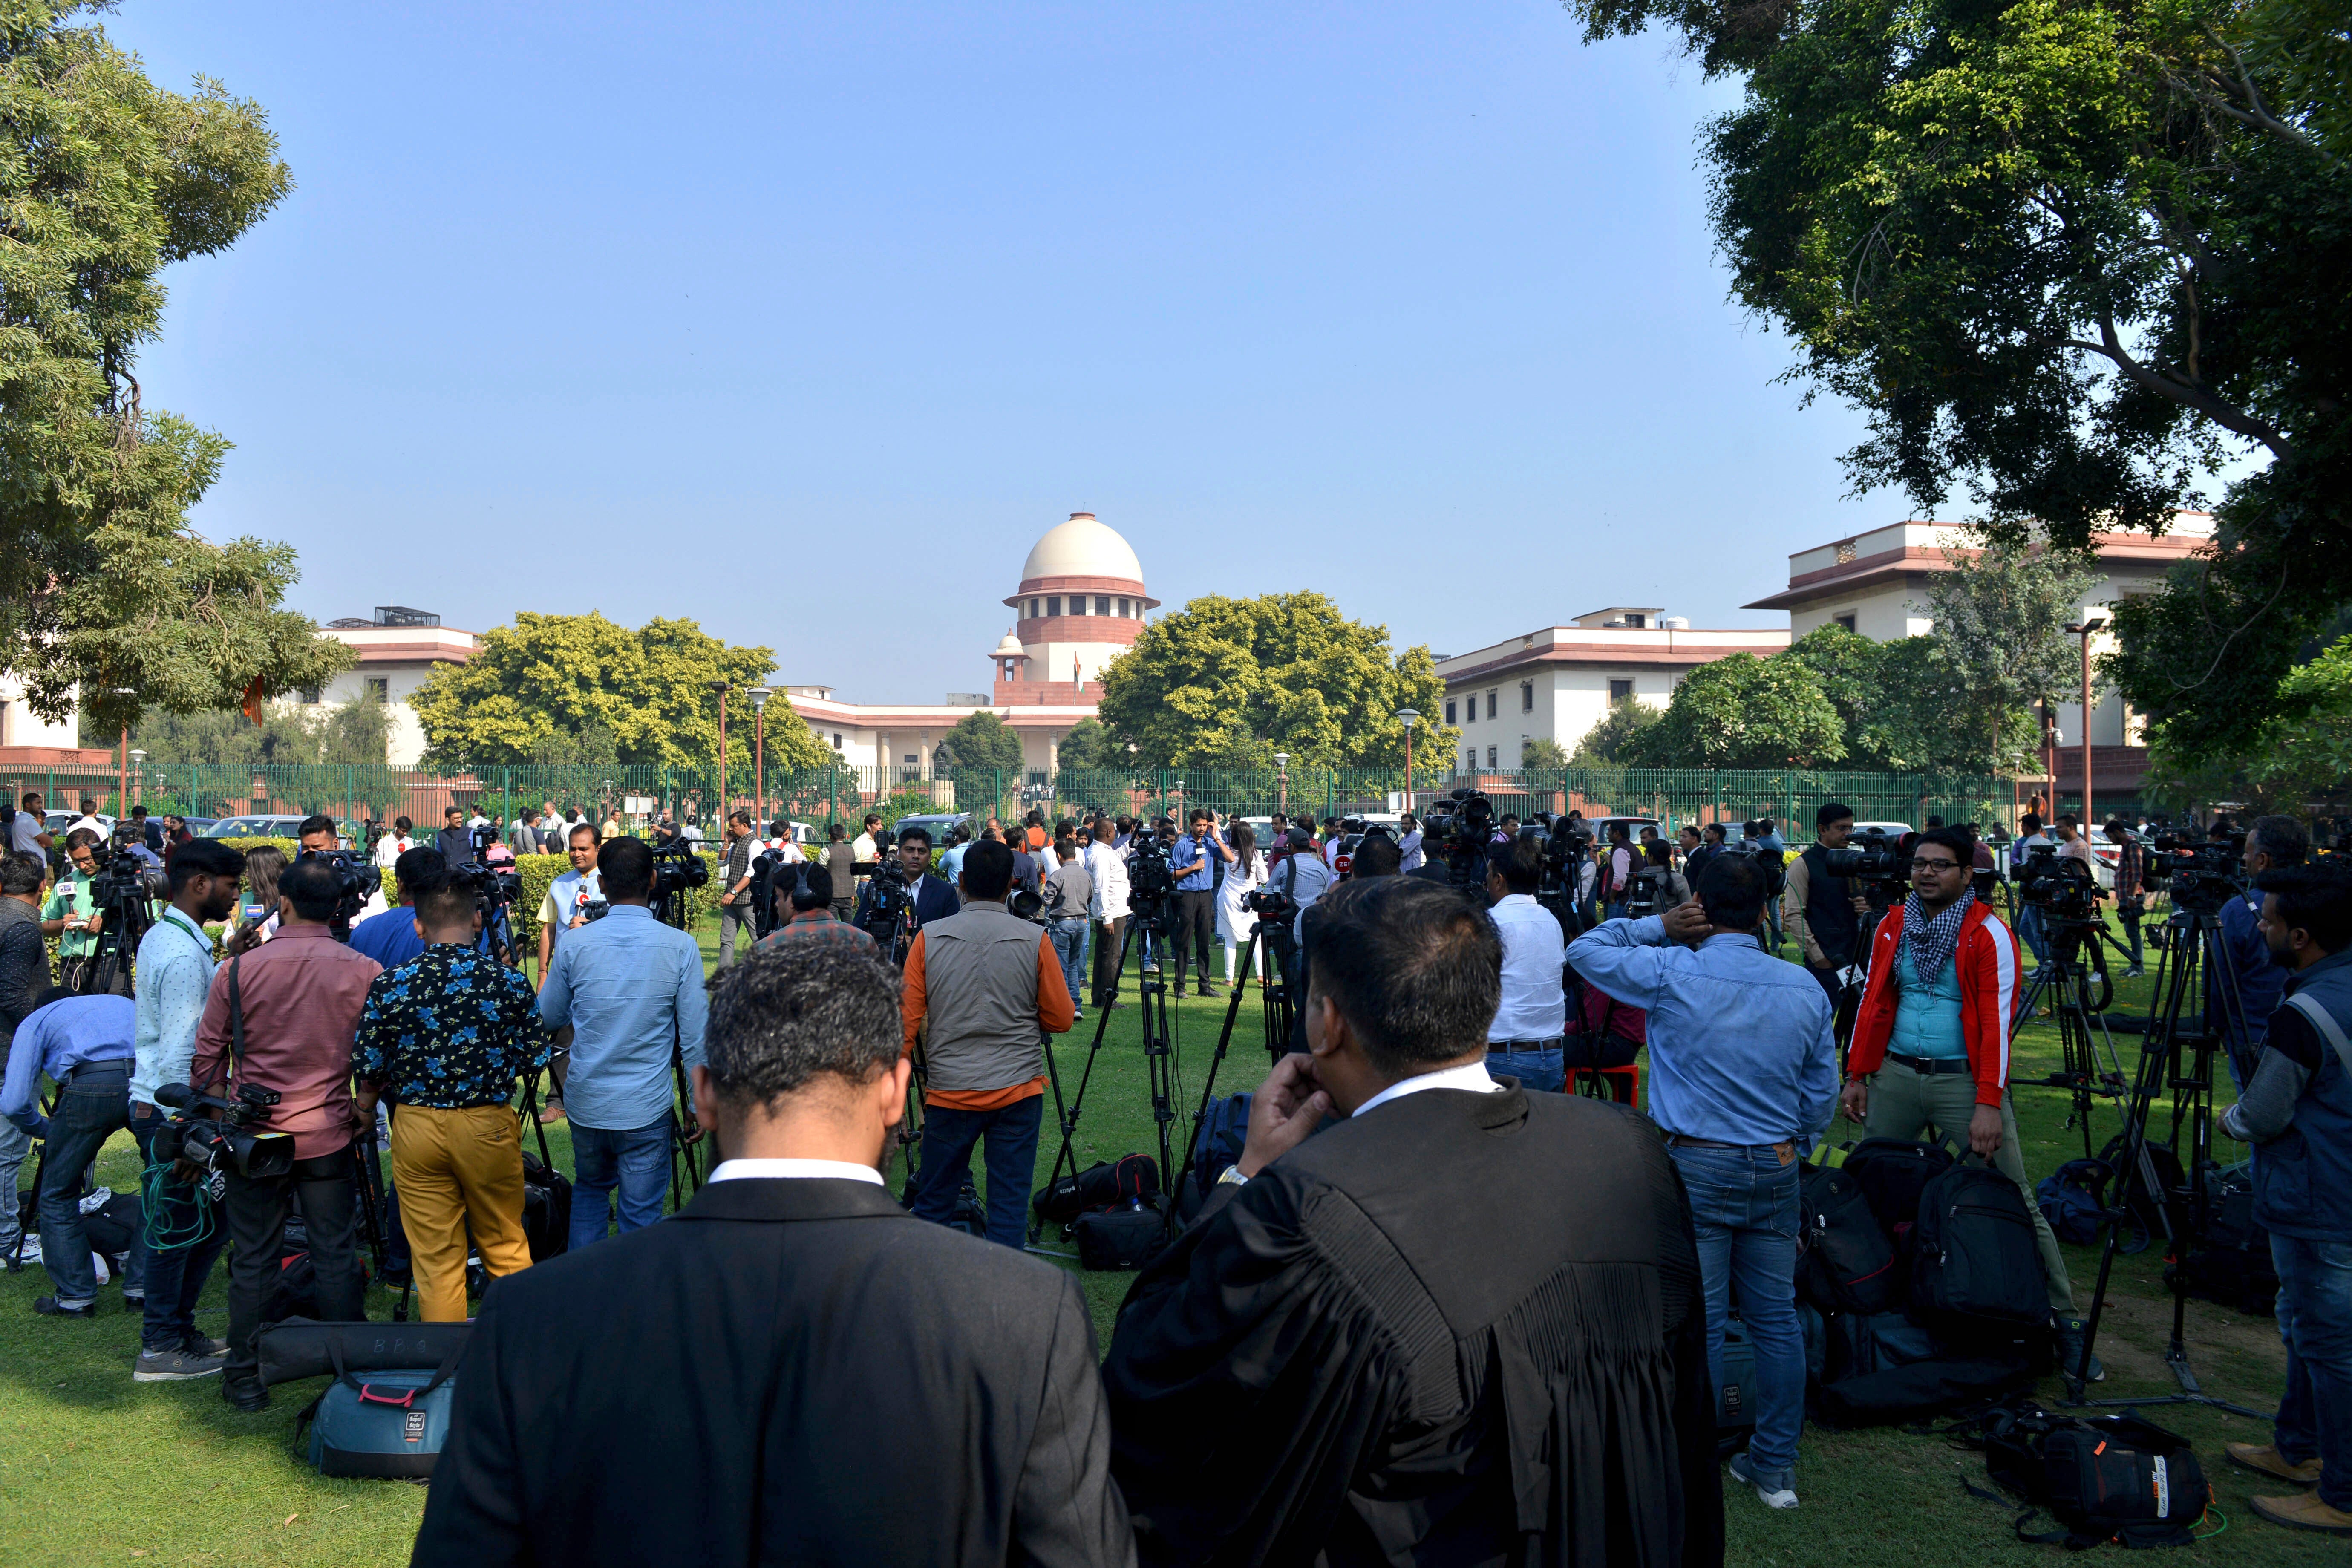 File: A crowd gathers outside India’s Supreme Court